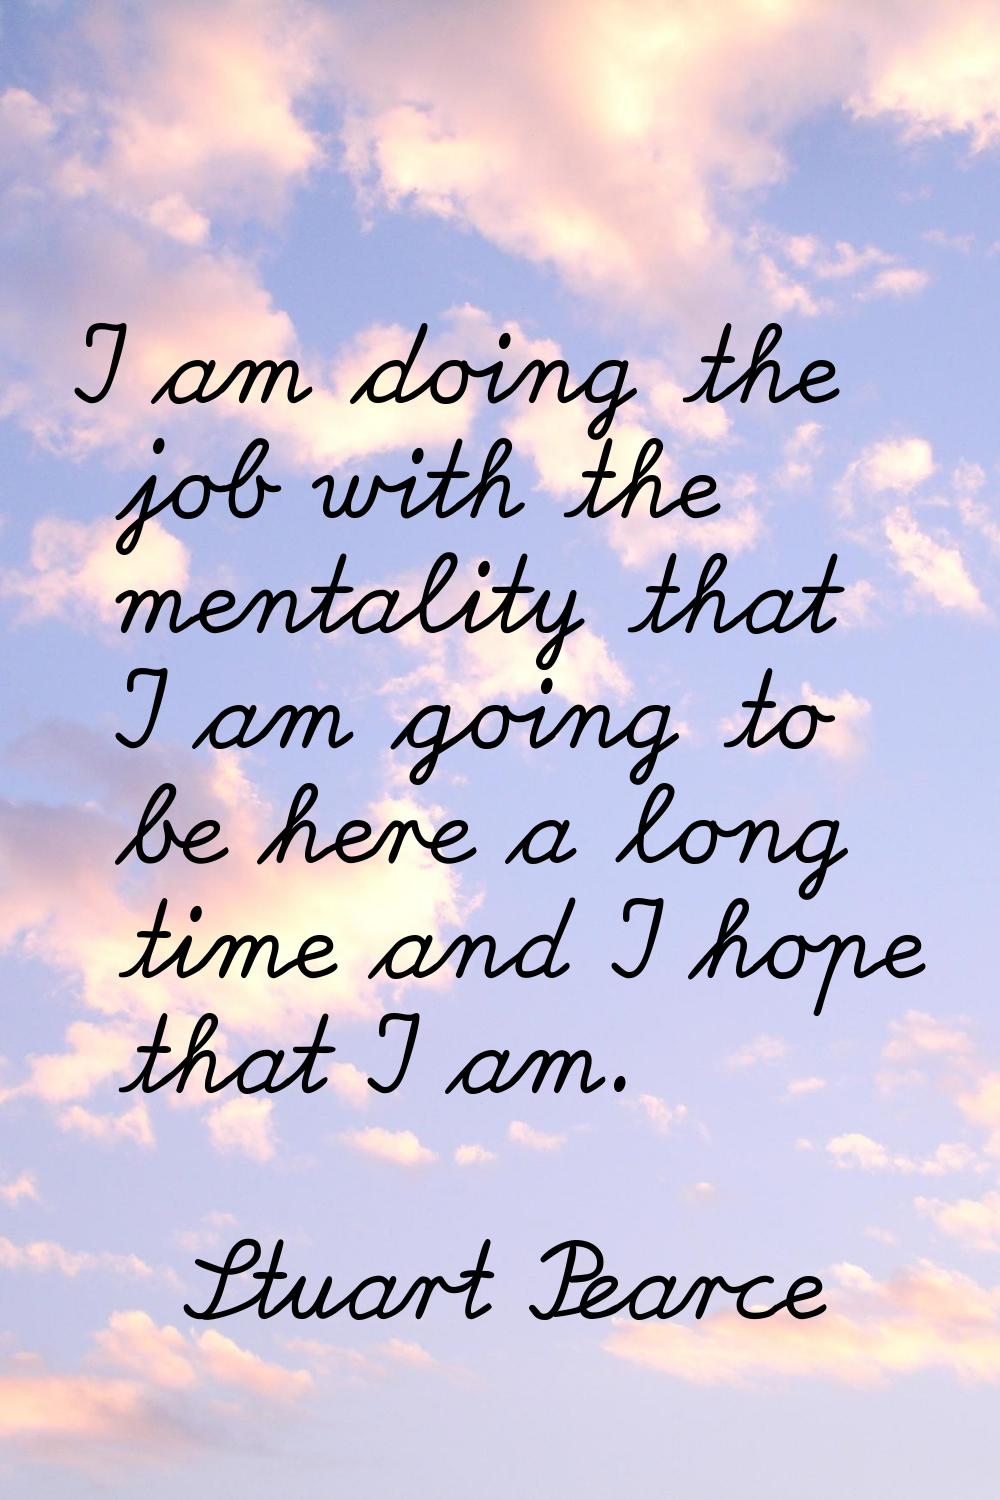 I am doing the job with the mentality that I am going to be here a long time and I hope that I am.